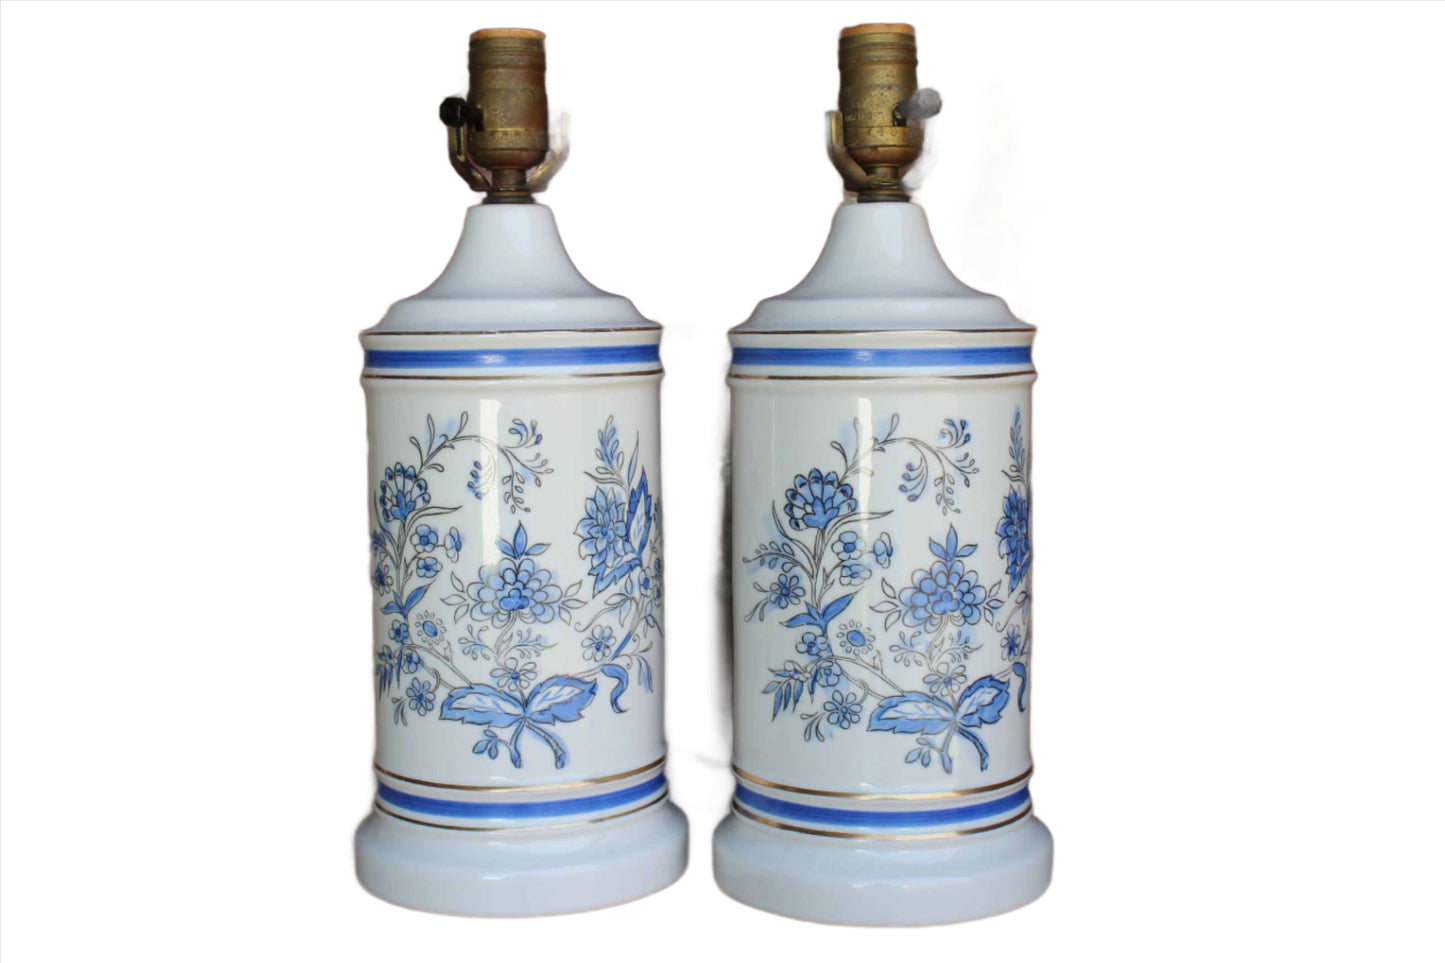 Matching Pair of Ceramic Lamps Painted with Blue Flowers